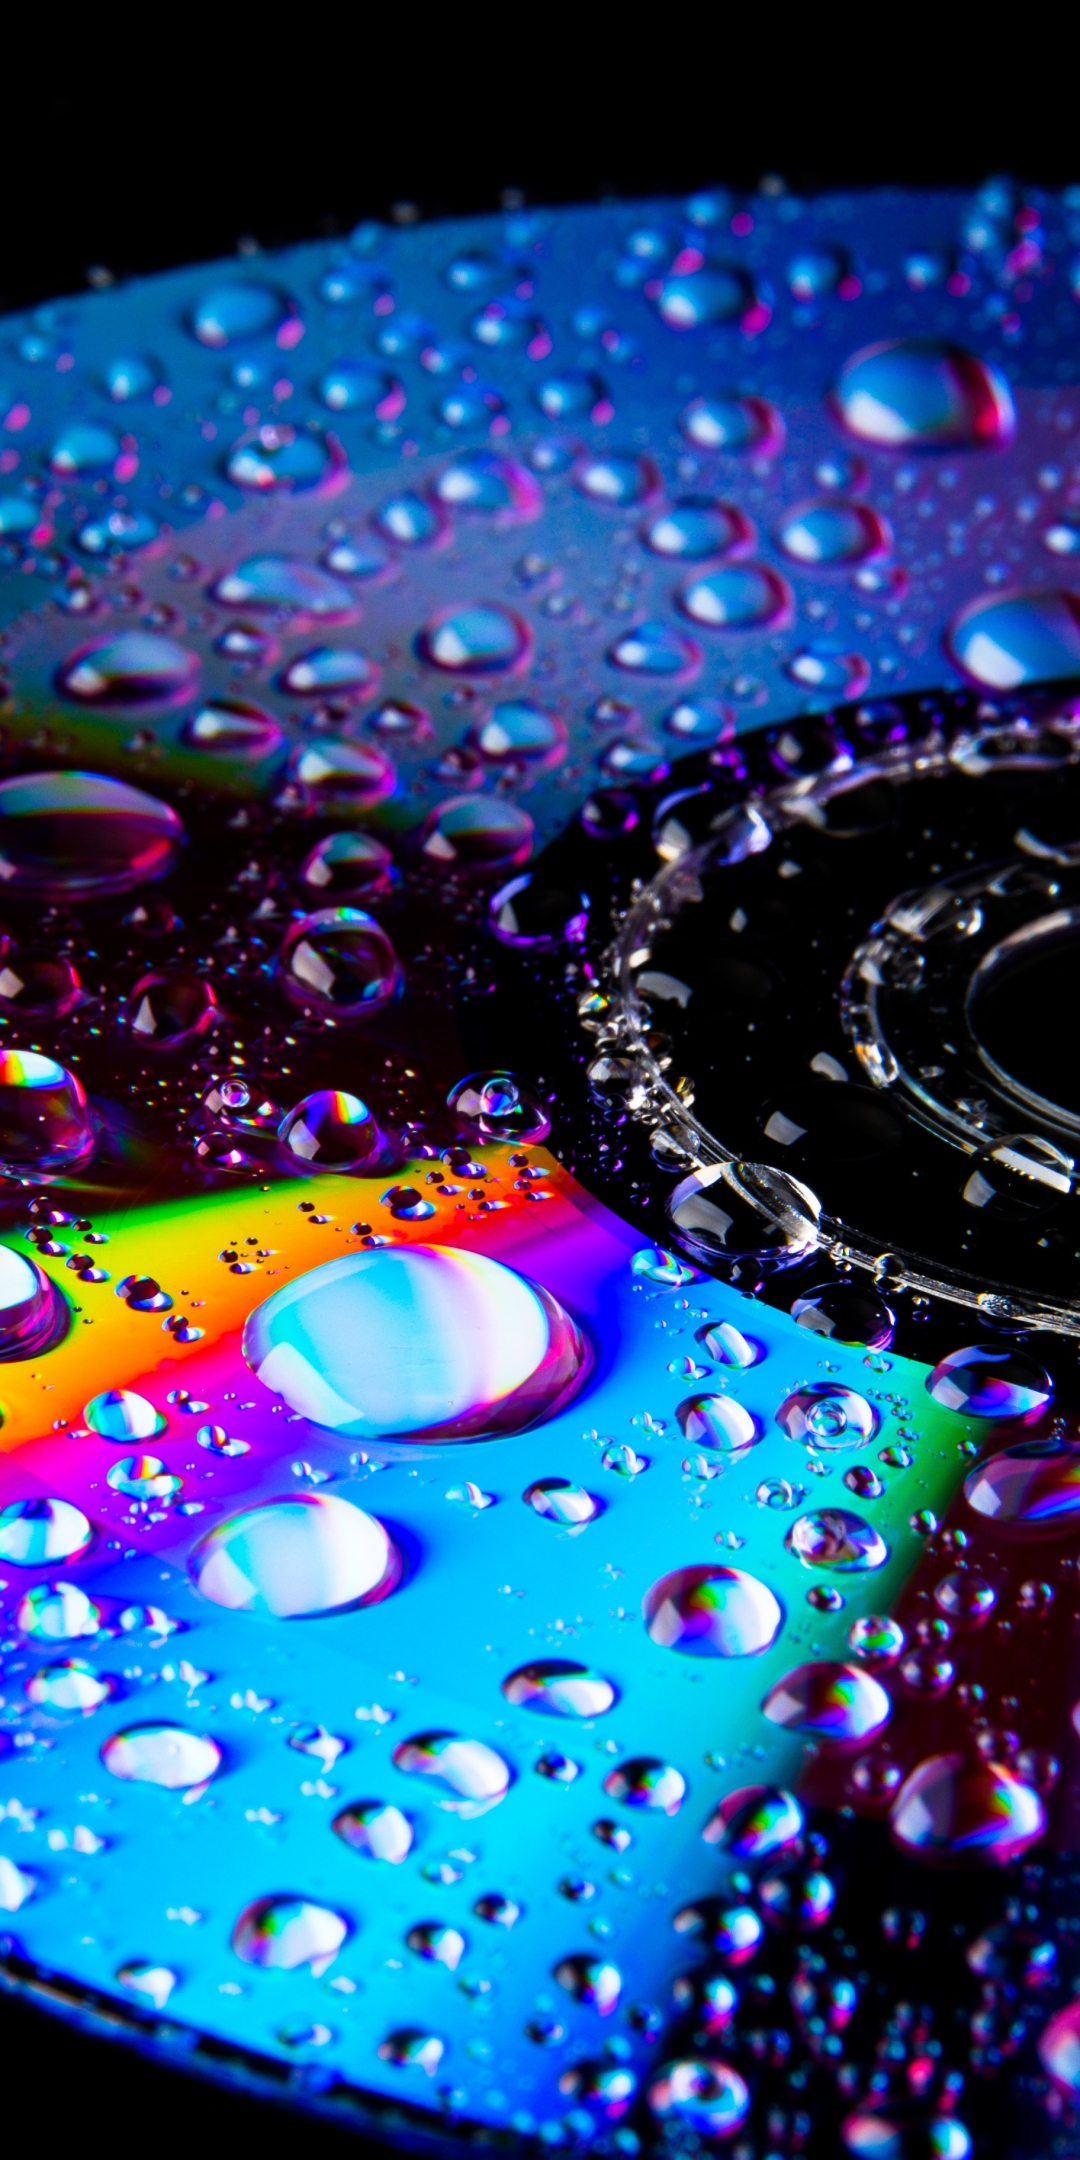 Disk, wet surface, drops, colorful, reflections, 1080x2160 wallpaper